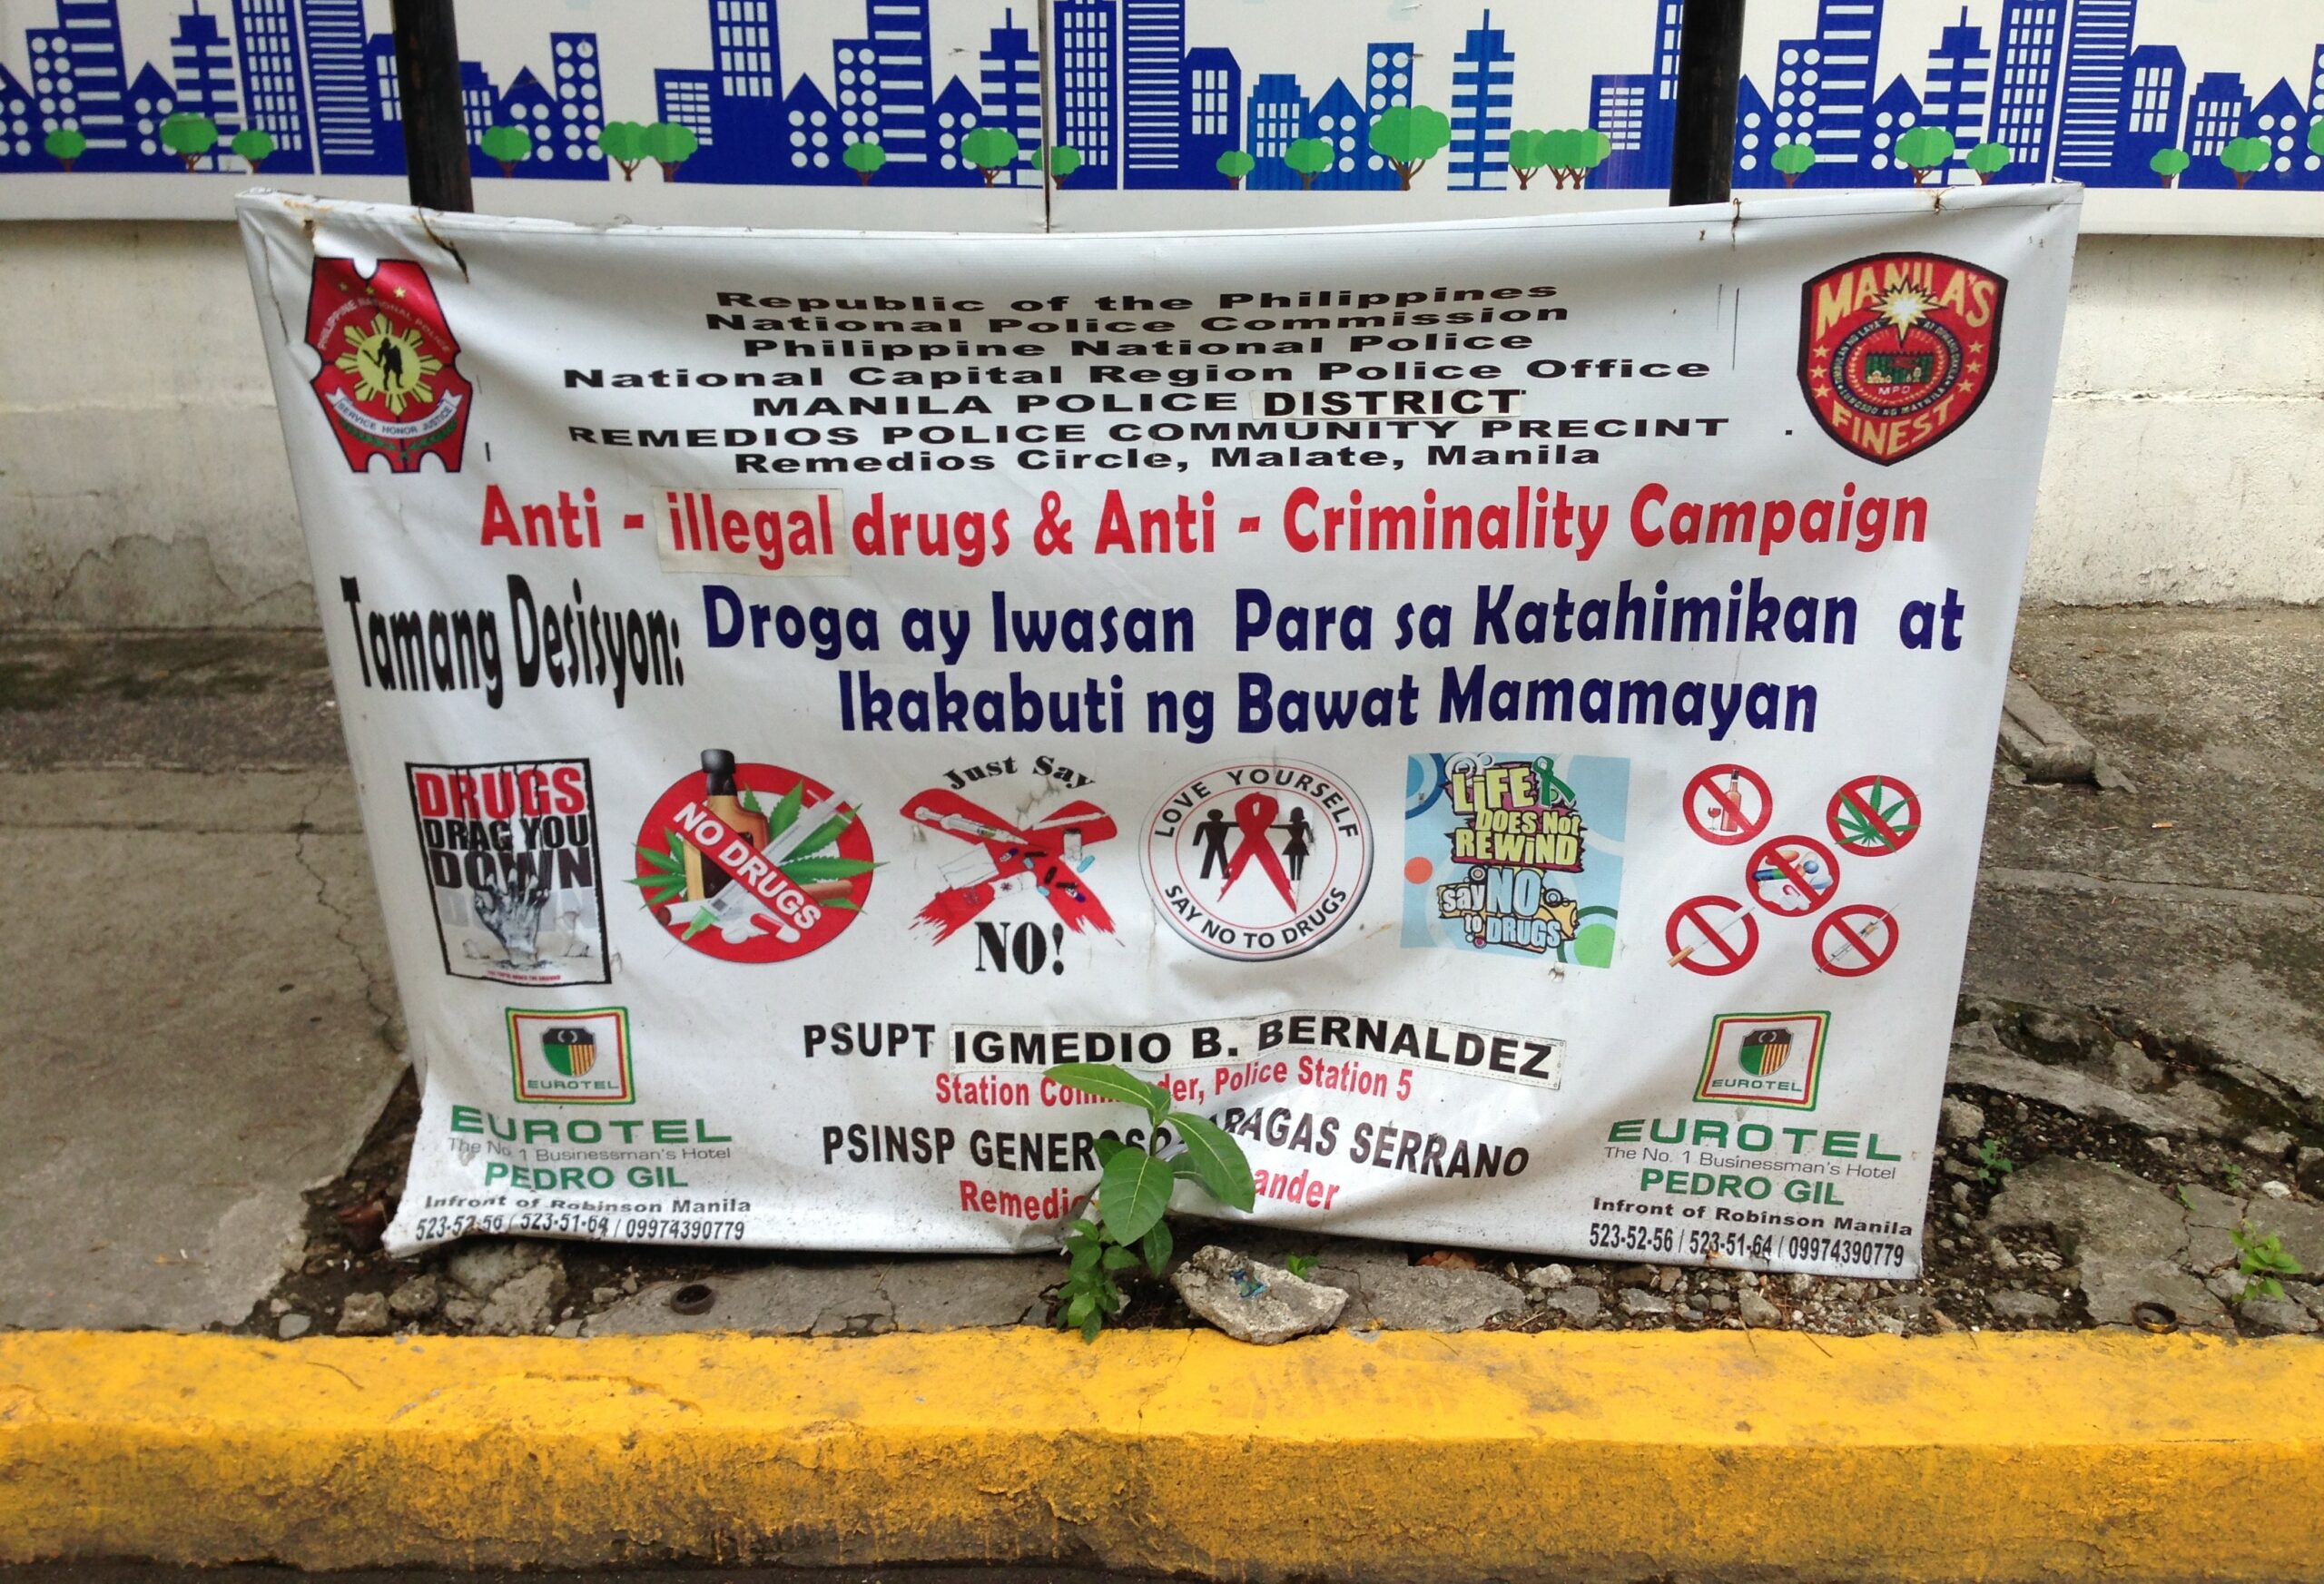 a sign in the street that reads "anti-illegal drugs & anti-criminality campaign"